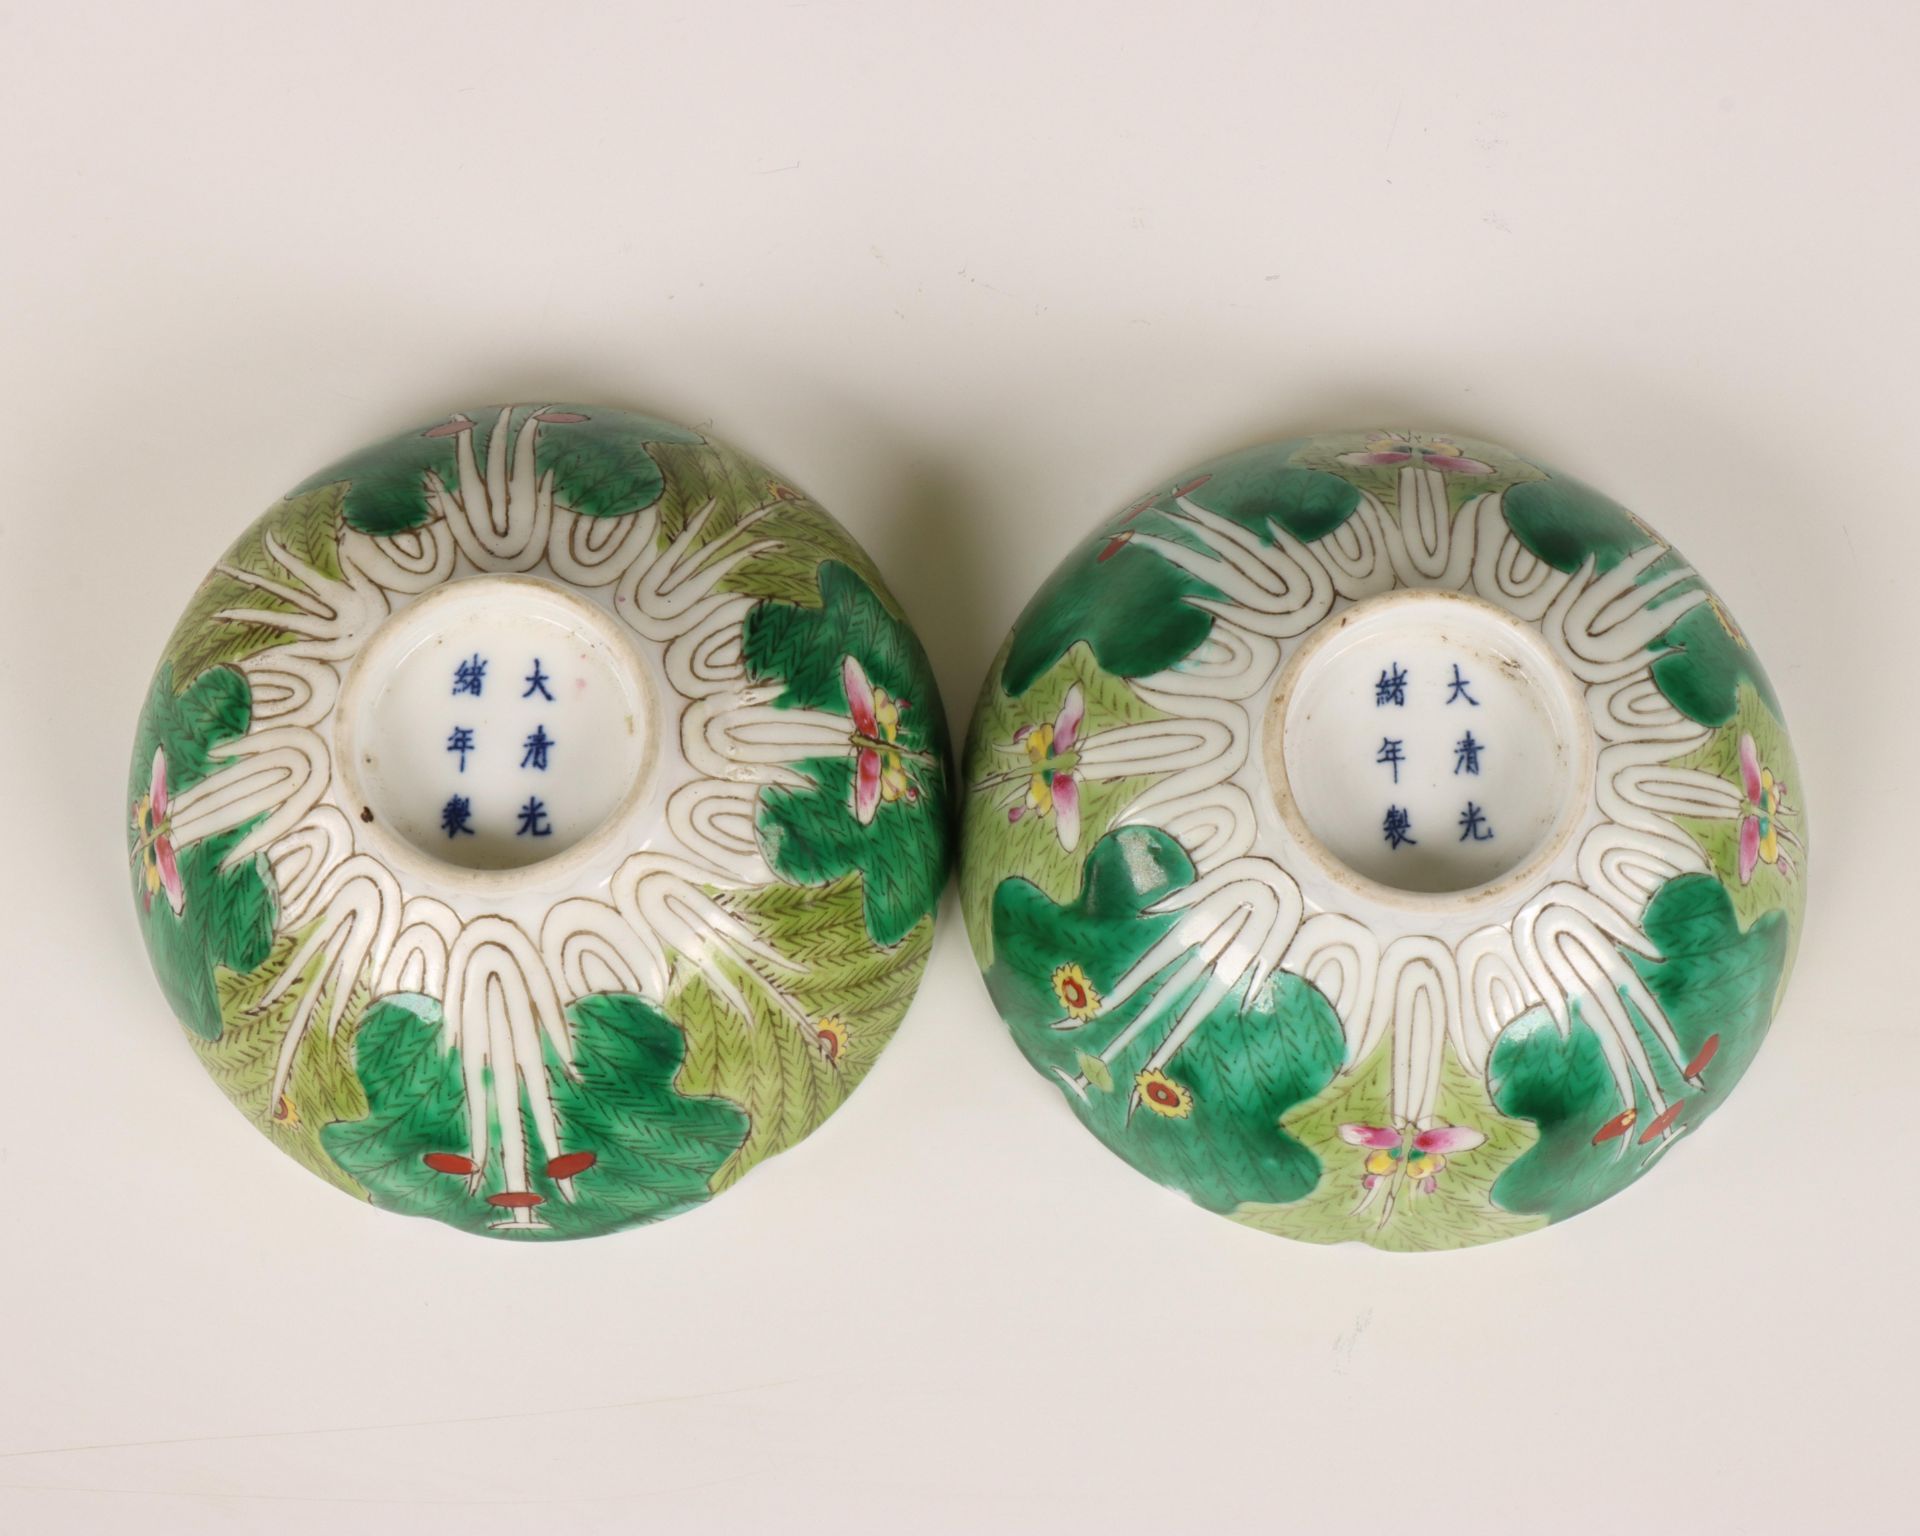 China, pair of famille verte porcelain 'cabbage' bowls, late 19th/ early 20th century, - Image 5 of 6